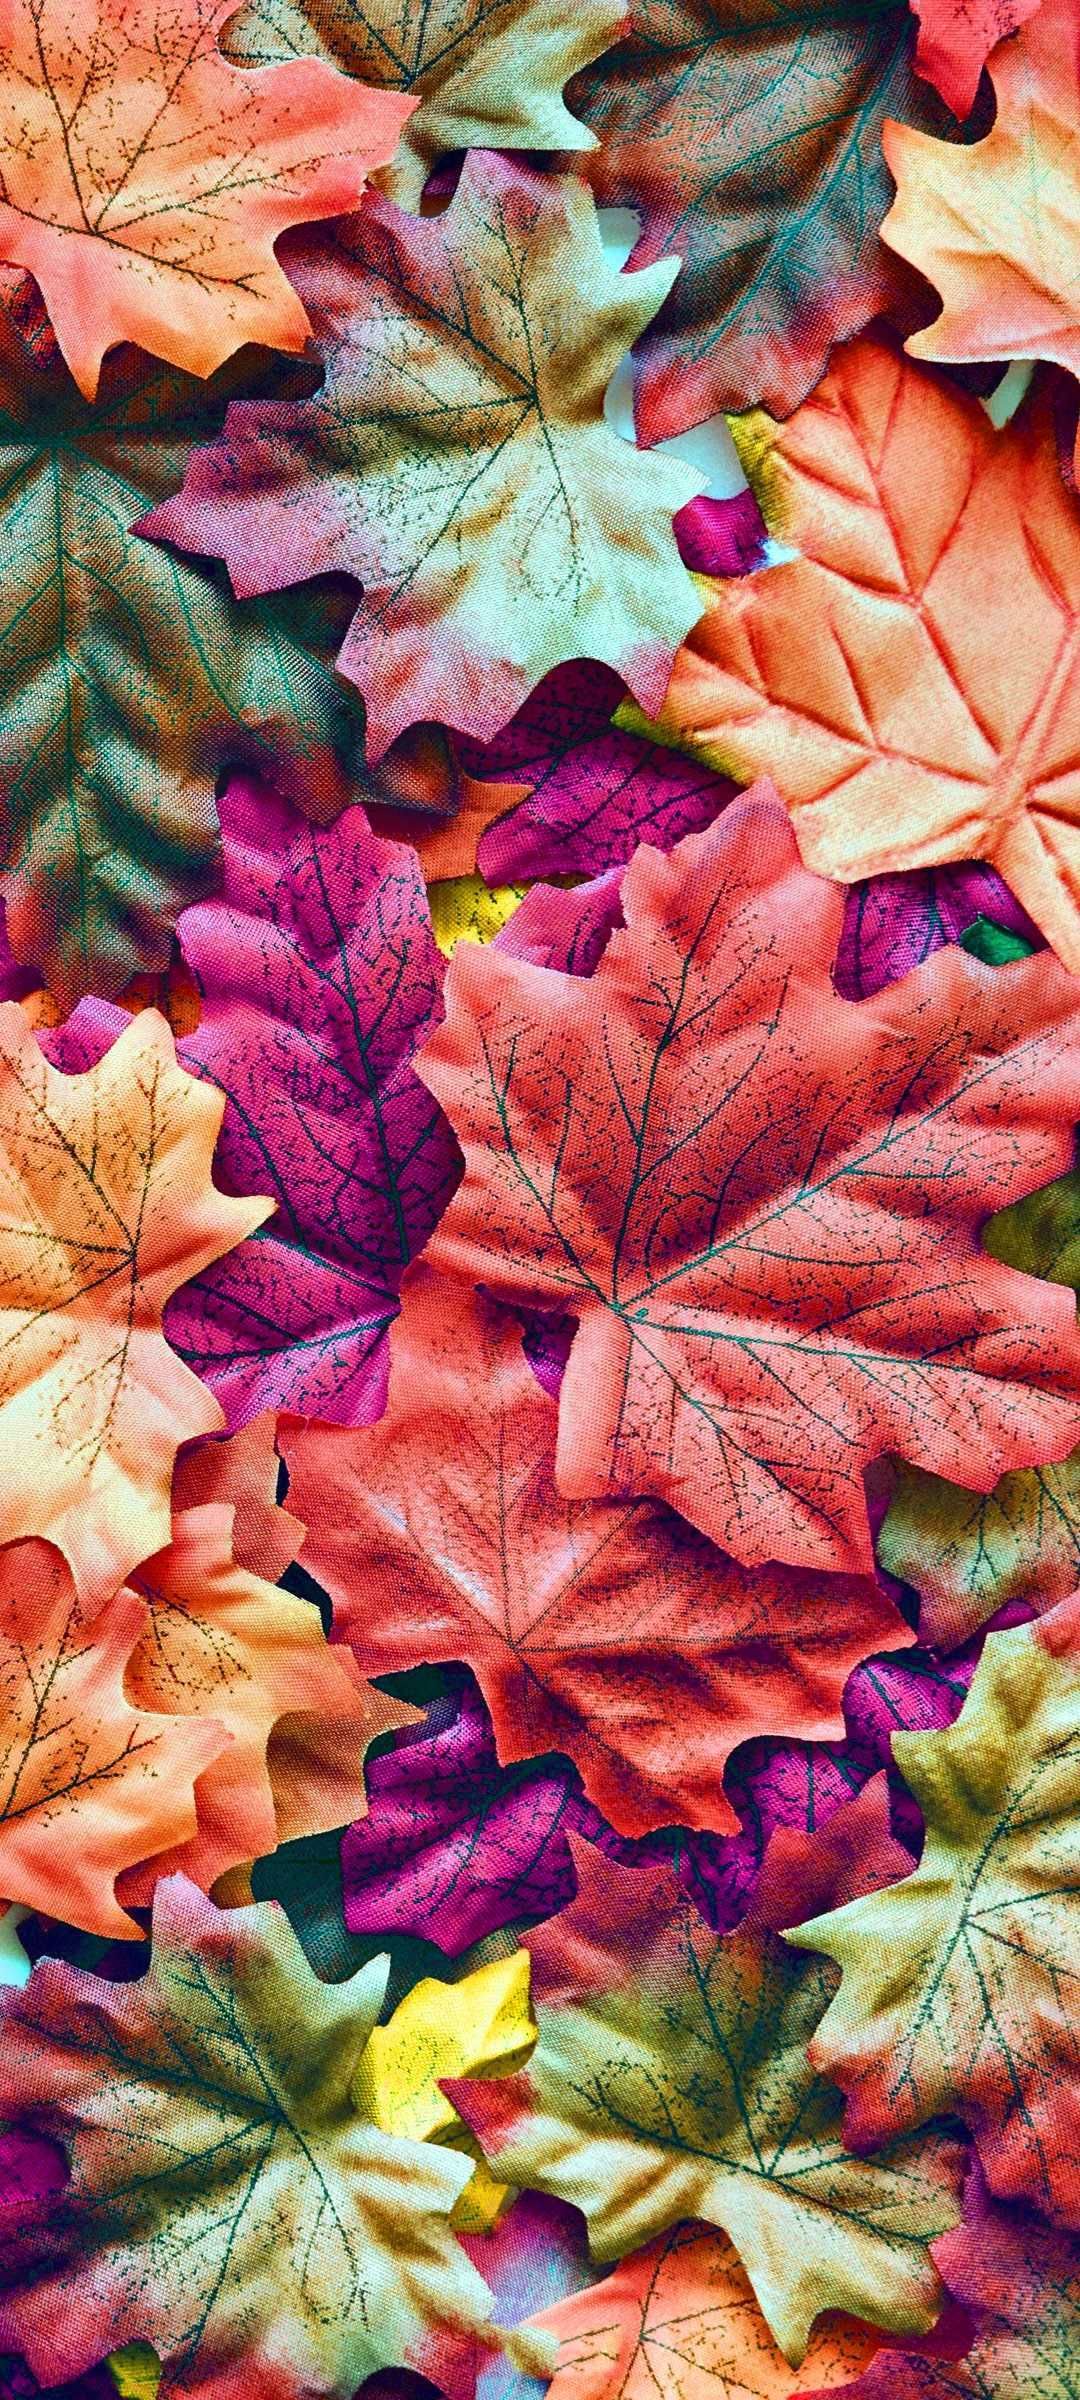 Autumn Wallpaper Browse Autumn Wallpaper with collections of Autumn, Fall, Forest,. Autumn wallpaper hd, Thanksgiving iphone wallpaper, Vintage flowers wallpaper